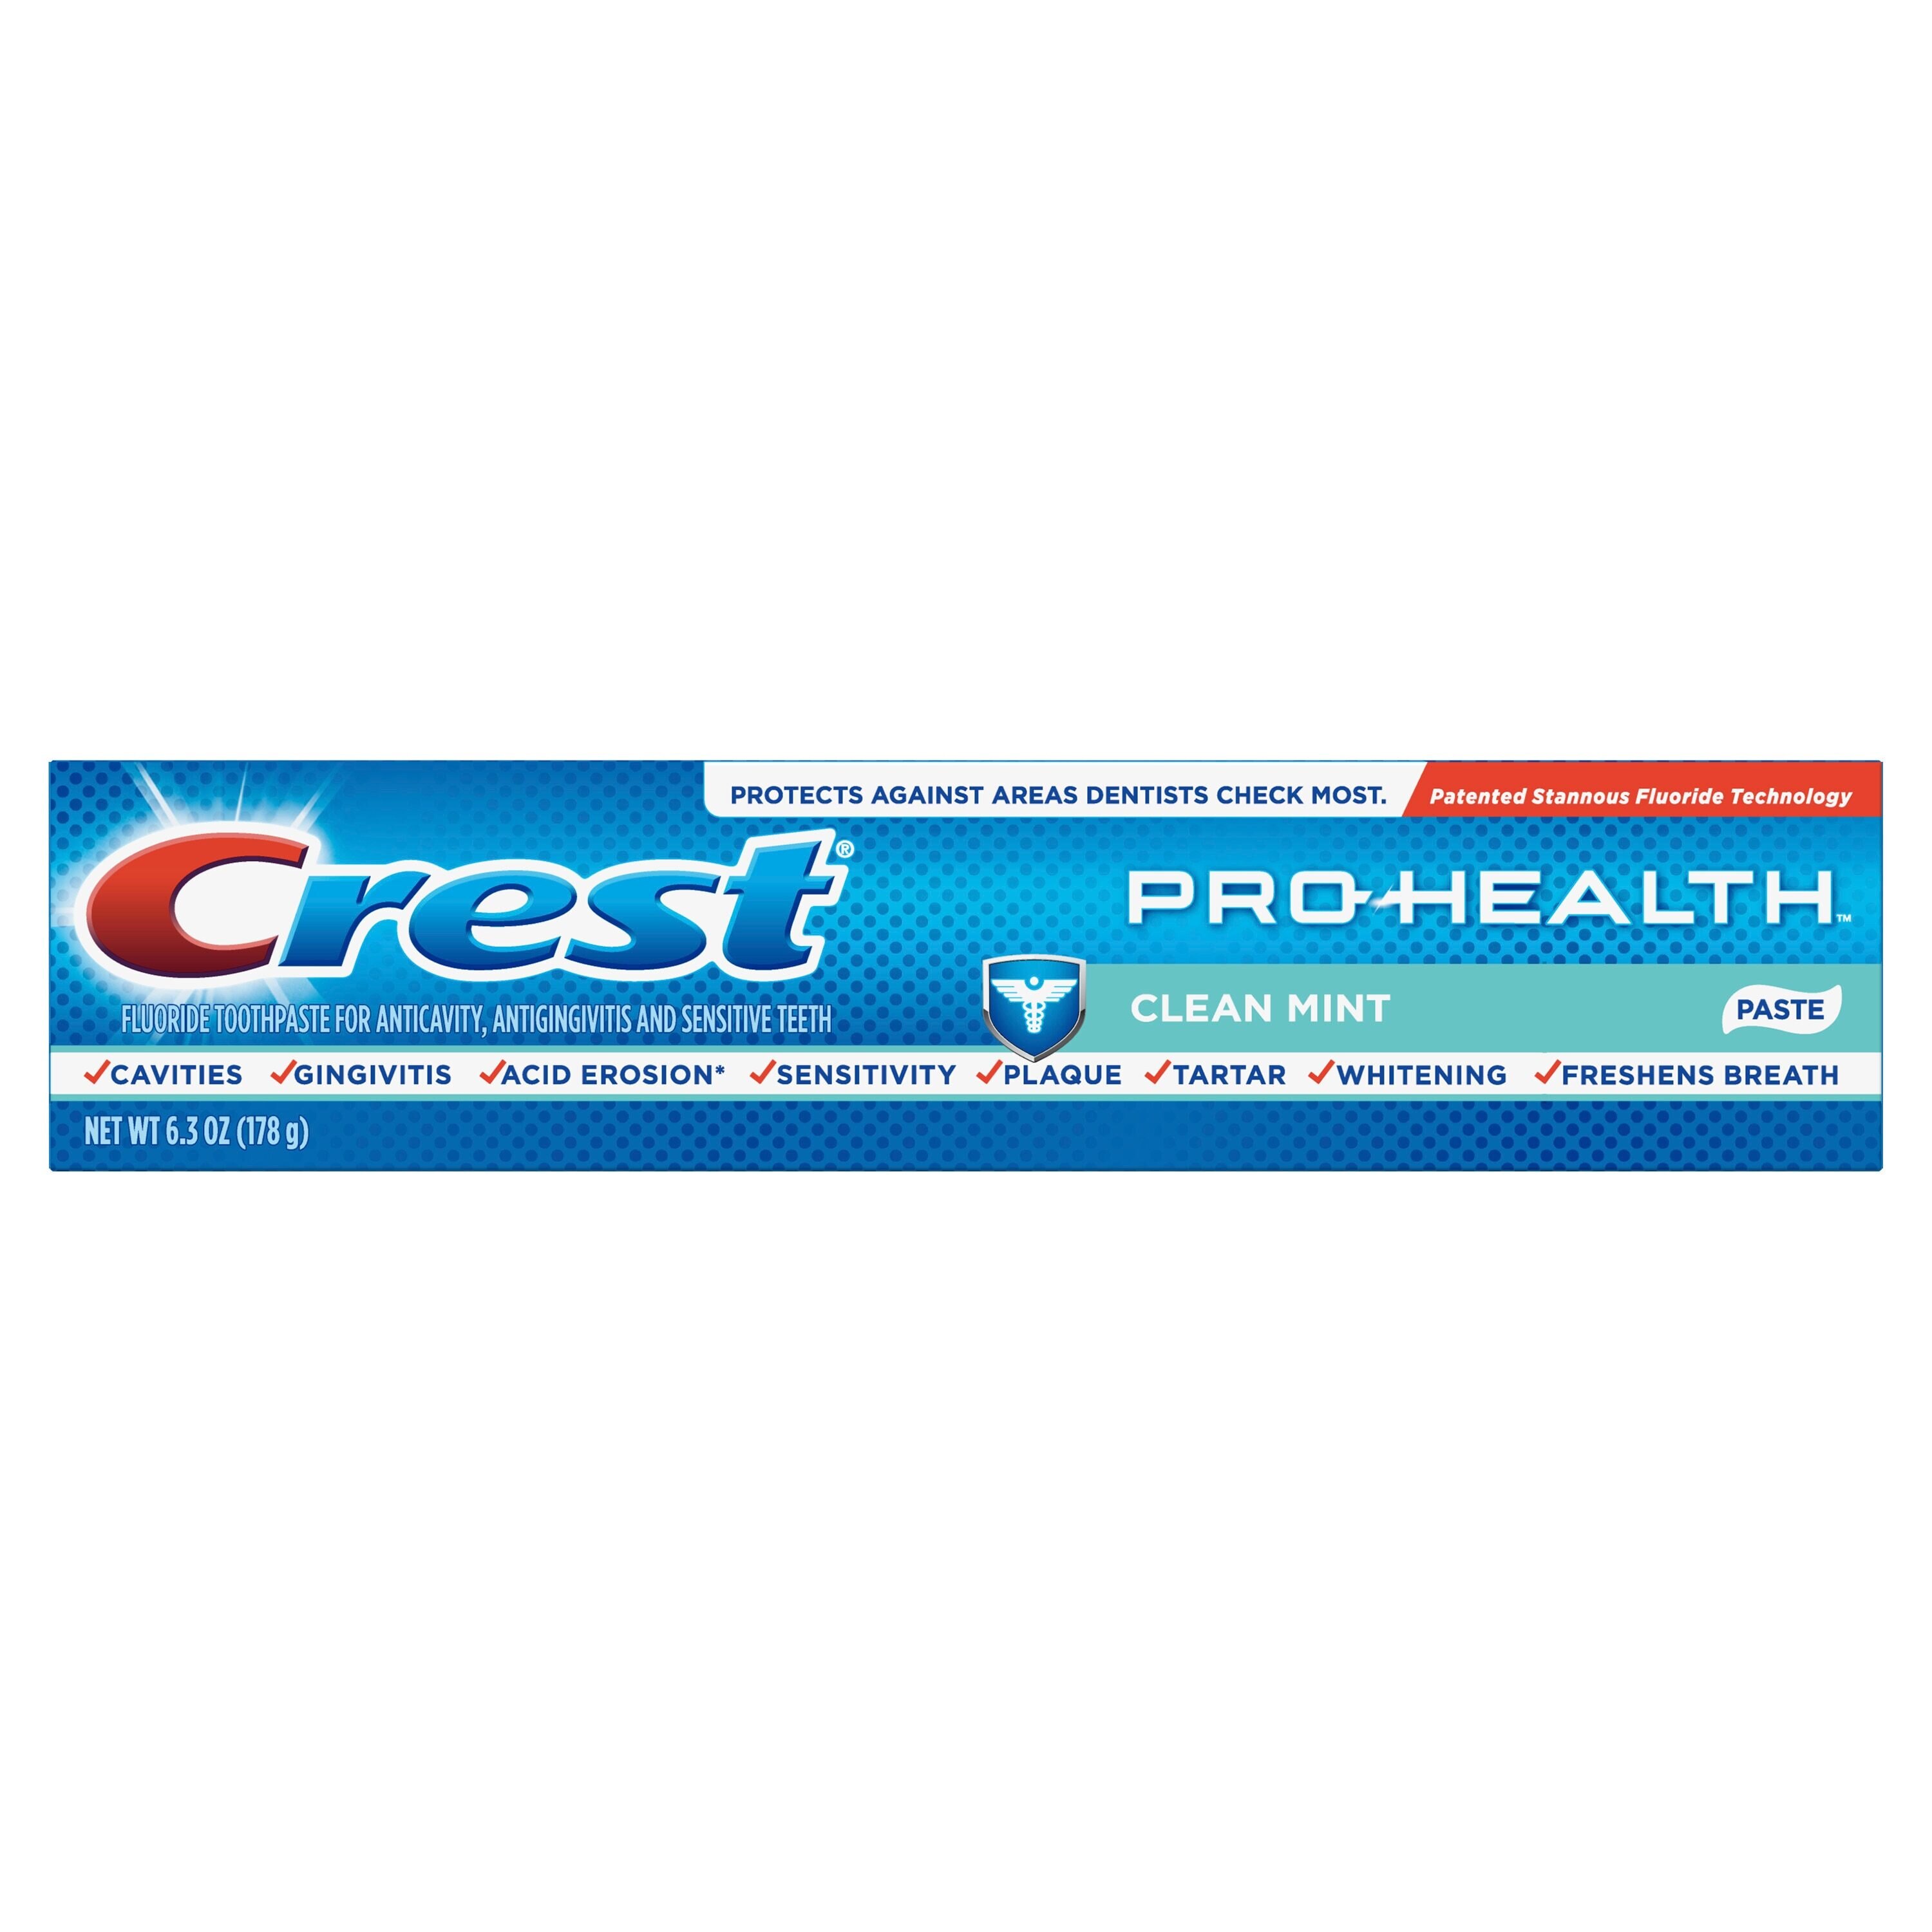 Crest Pro-Health Toothpaste for Anticavity, Antigingivitis, and Sensitive Teeth with Stannous Fluoride, Deep Clean Mint, 6.3 OZ